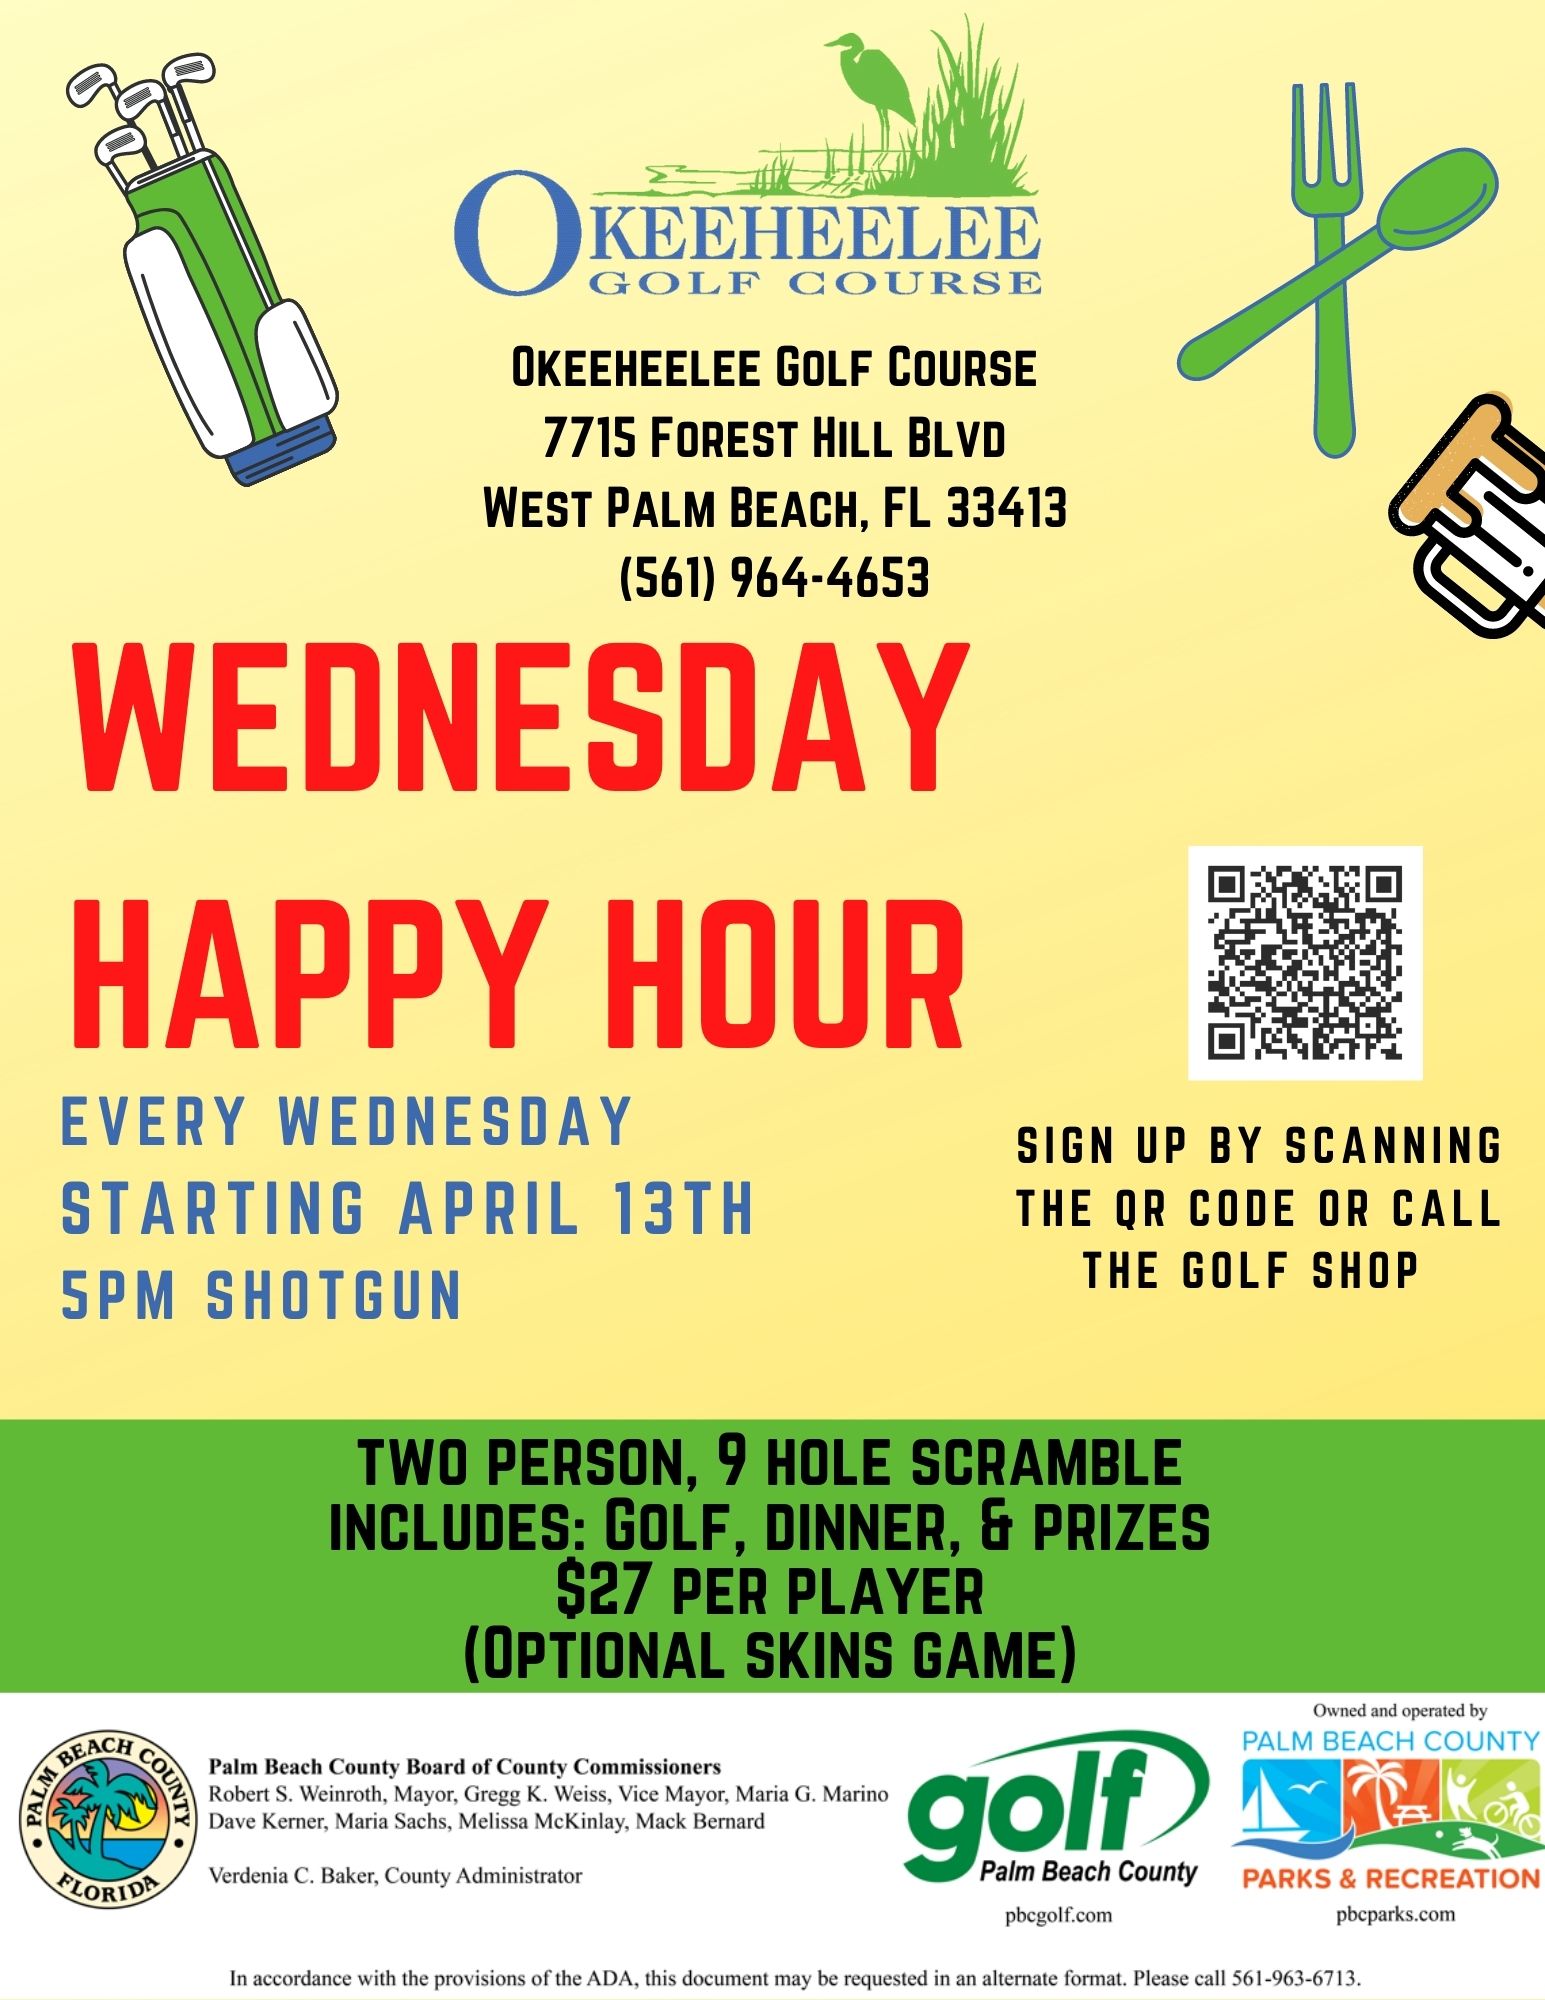 Flyer for Wednesday Happy Hour Event at Okeeheelee Golf Course